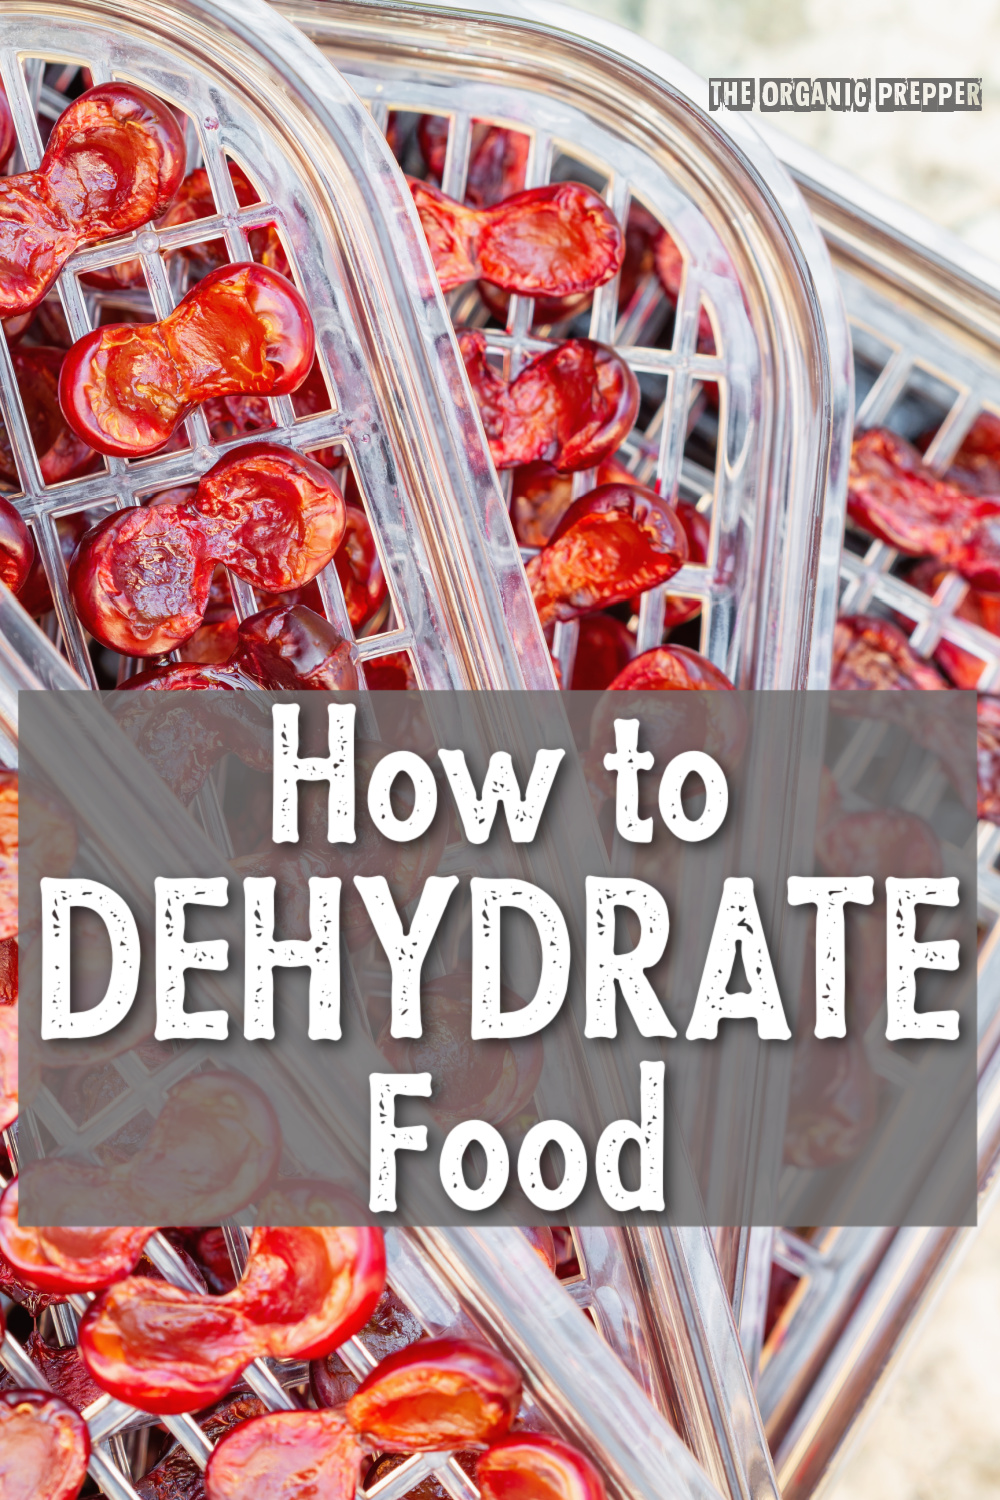 How to Dehydrate Food